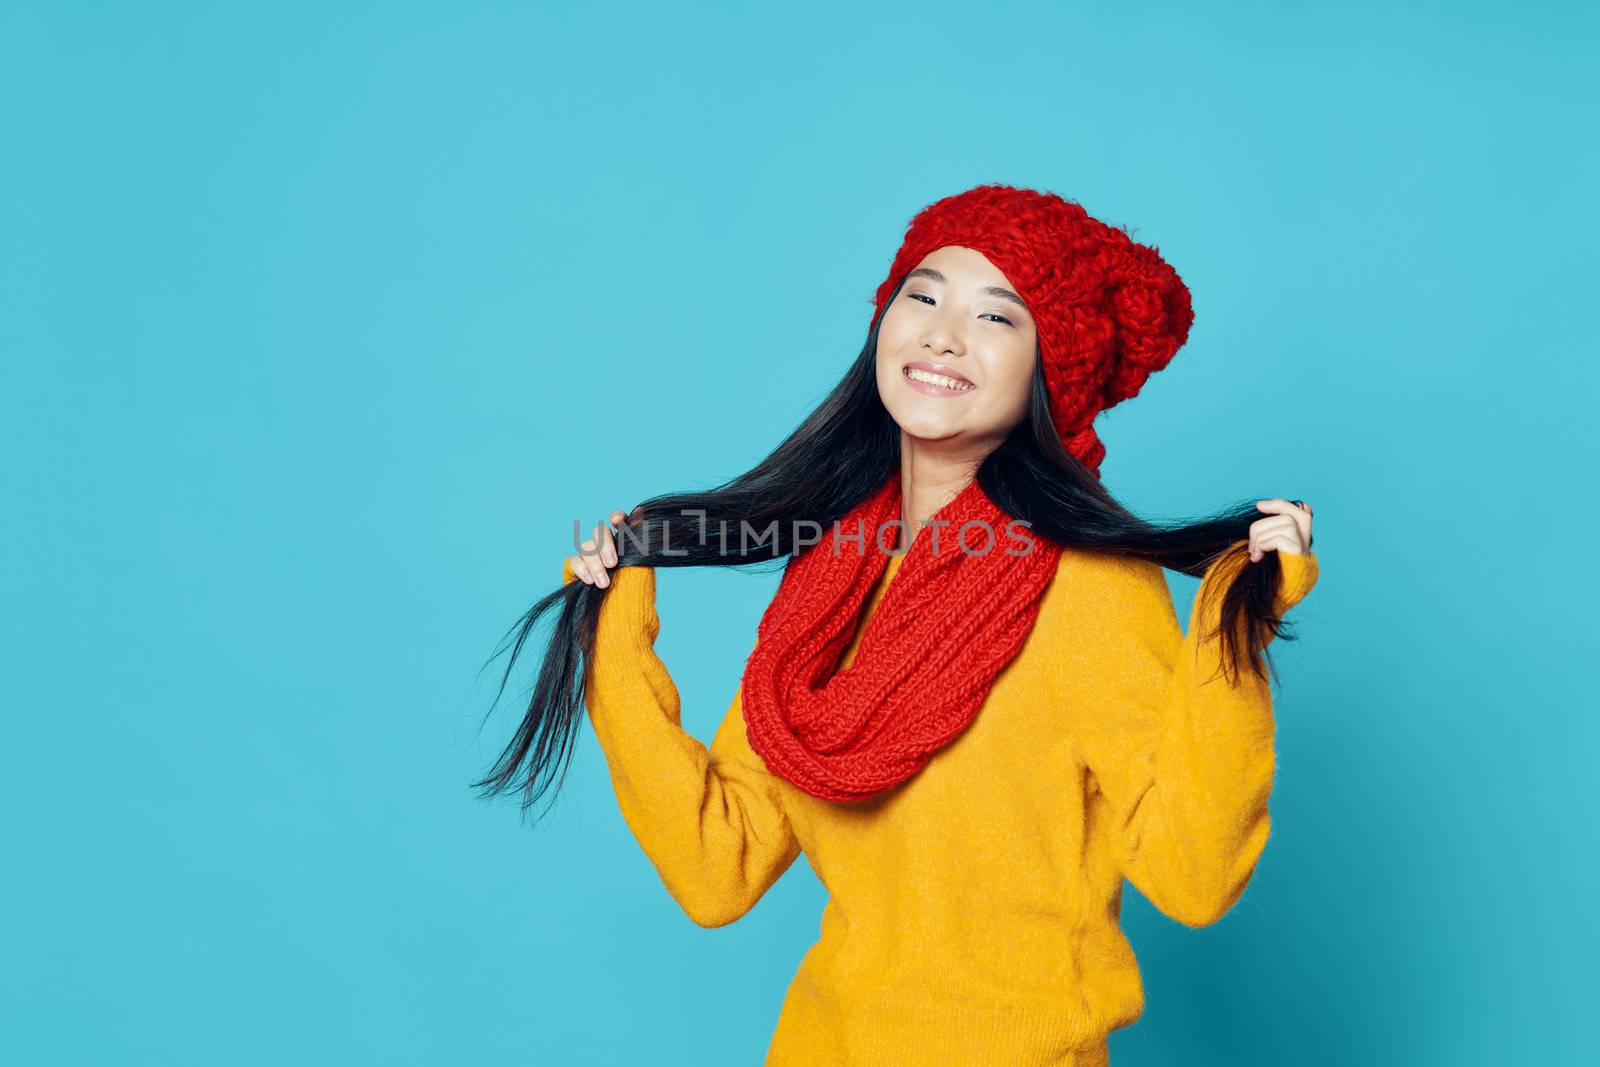 Happy woman touches her hair with her hands and laughs at the camera by SHOTPRIME